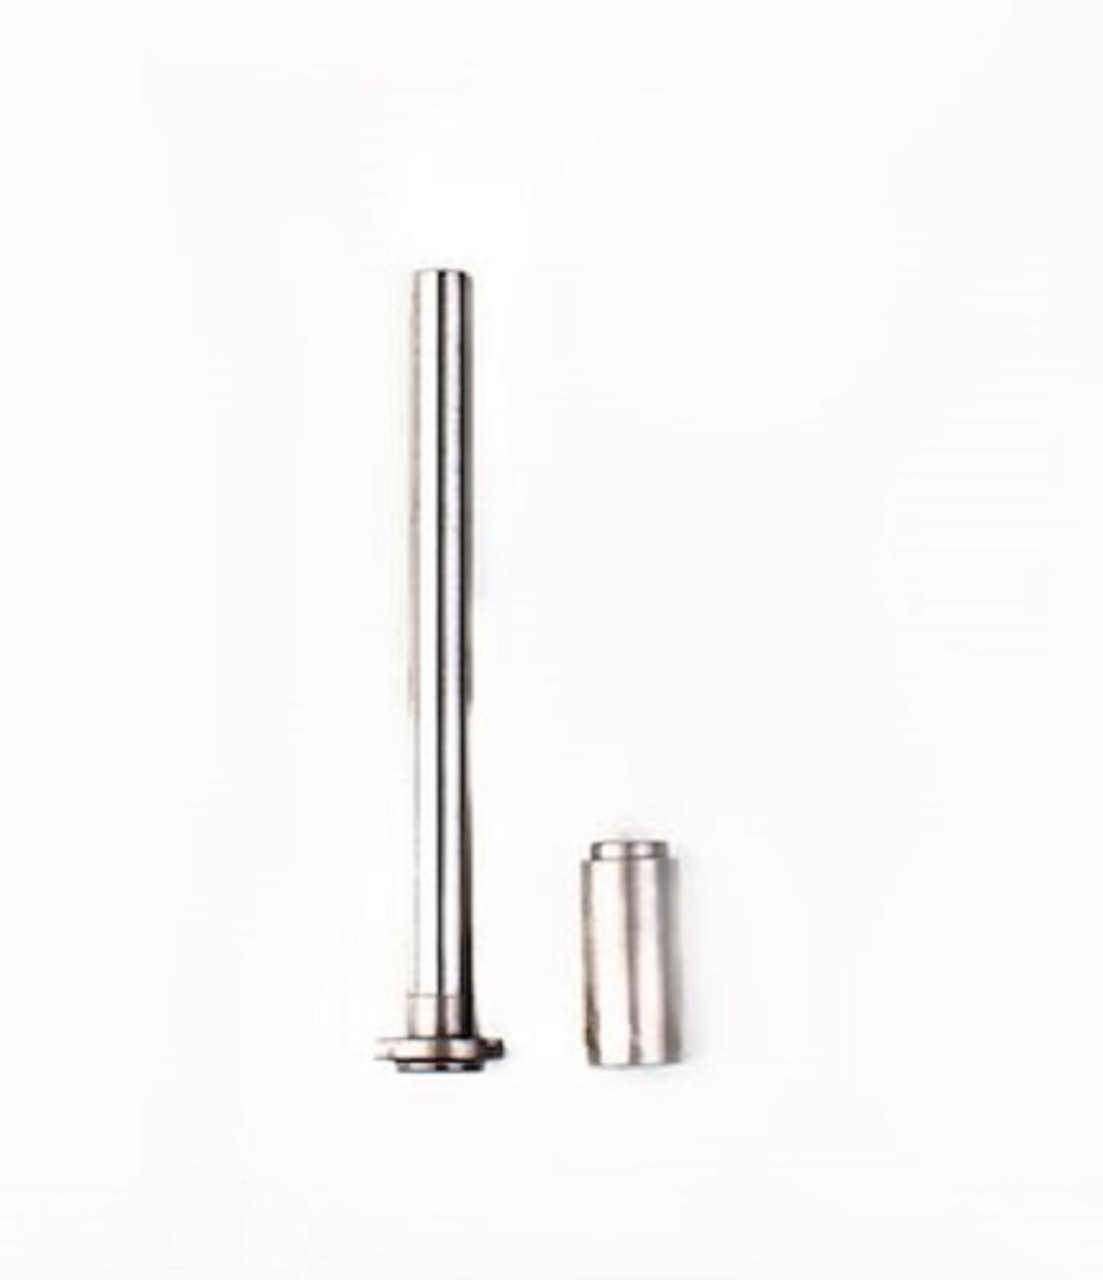 Kimber 1911 Full Length Guide Rod and Plug Set Stainless Steel 4100100 NEW